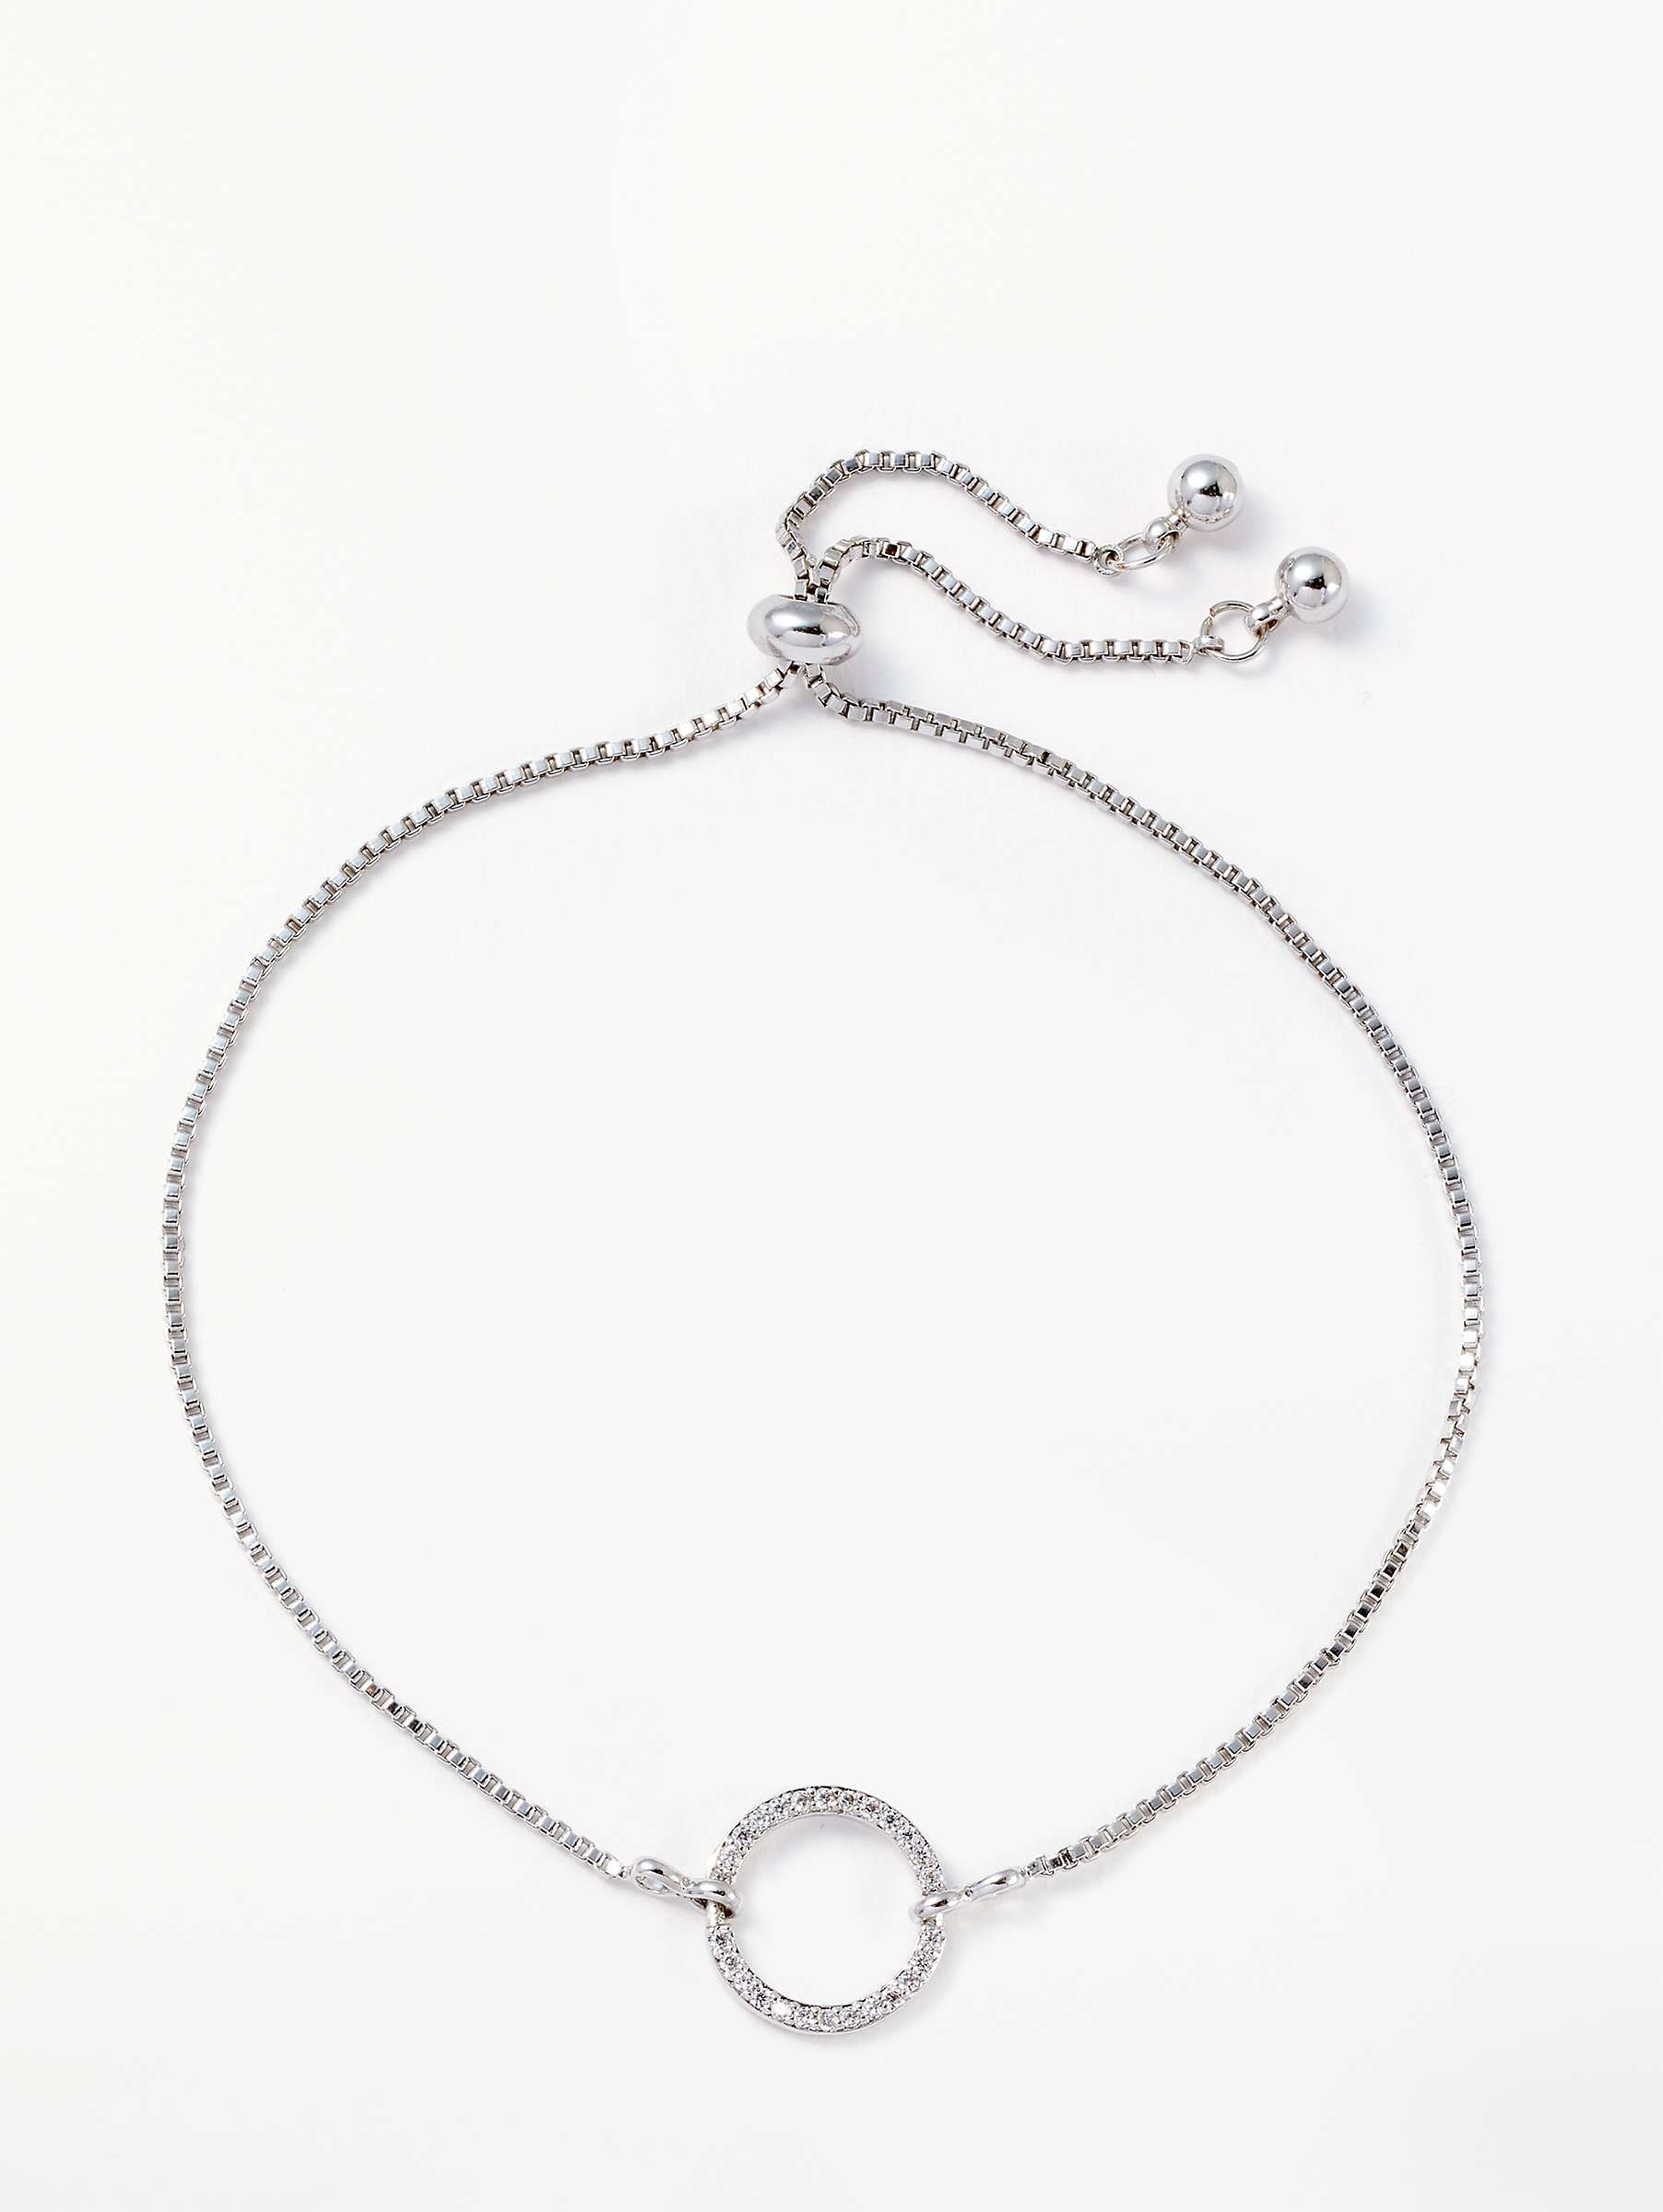 John Lewis Necklace Silver Order Discount | skyhouse.md